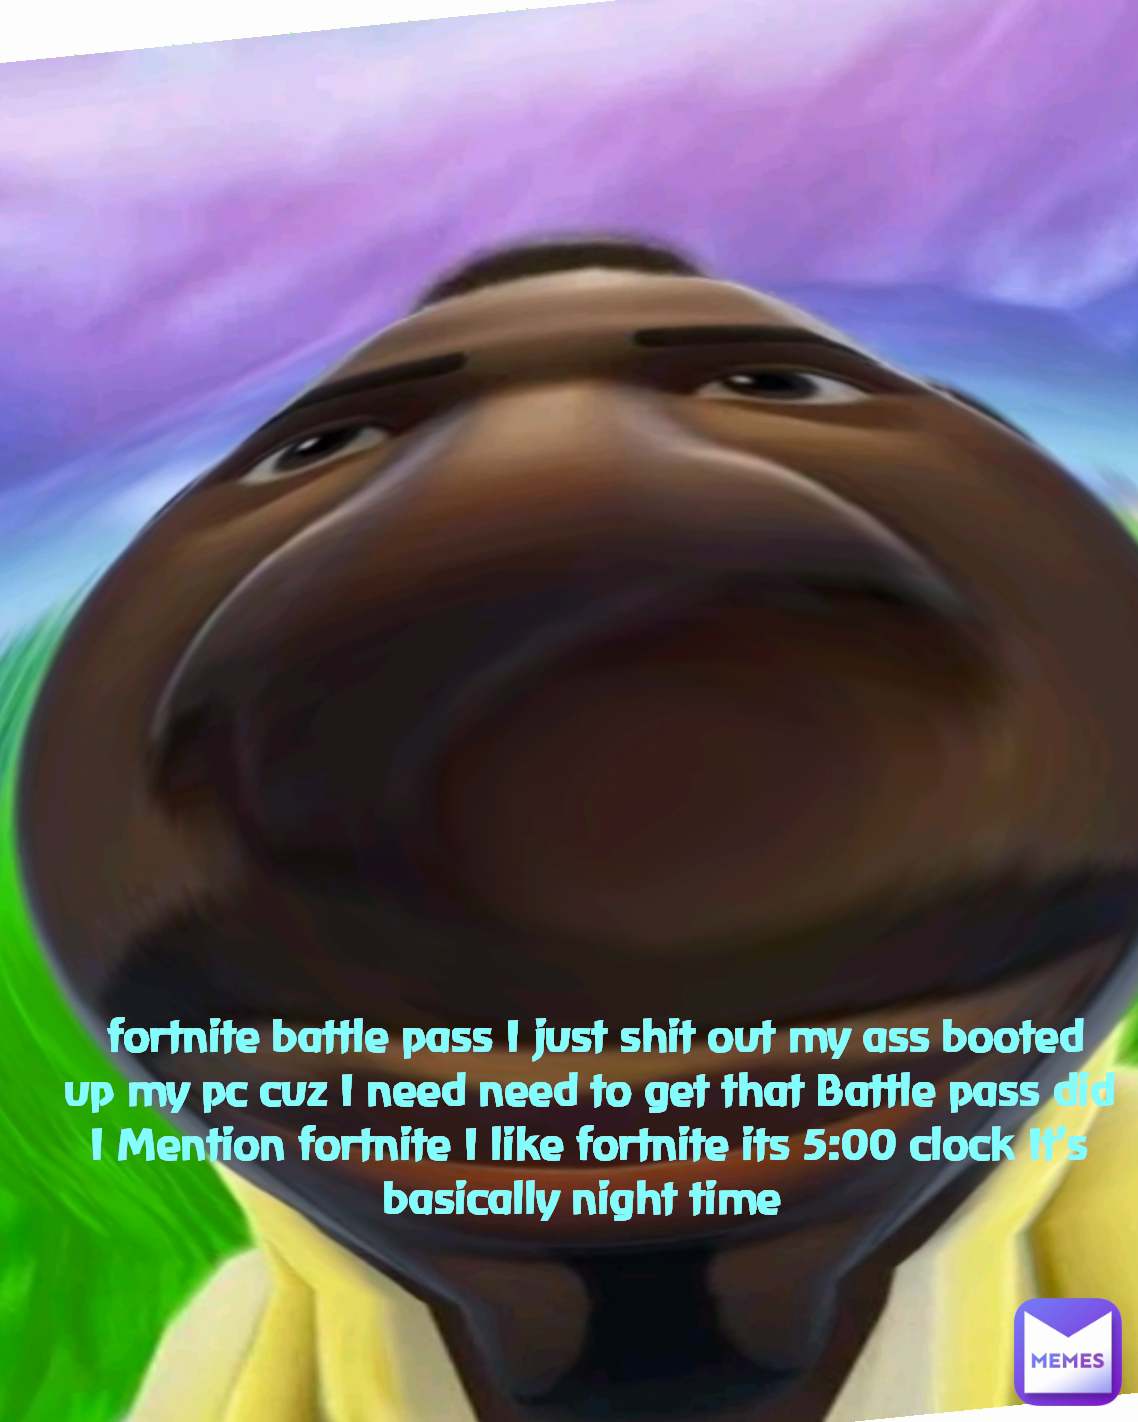  fortnite battle pass I just shit out my ass booted up my pc cuz I need need to get that Battle pass did I Mention fortnite I like fortnite its 5:00 clock It's basically night time 